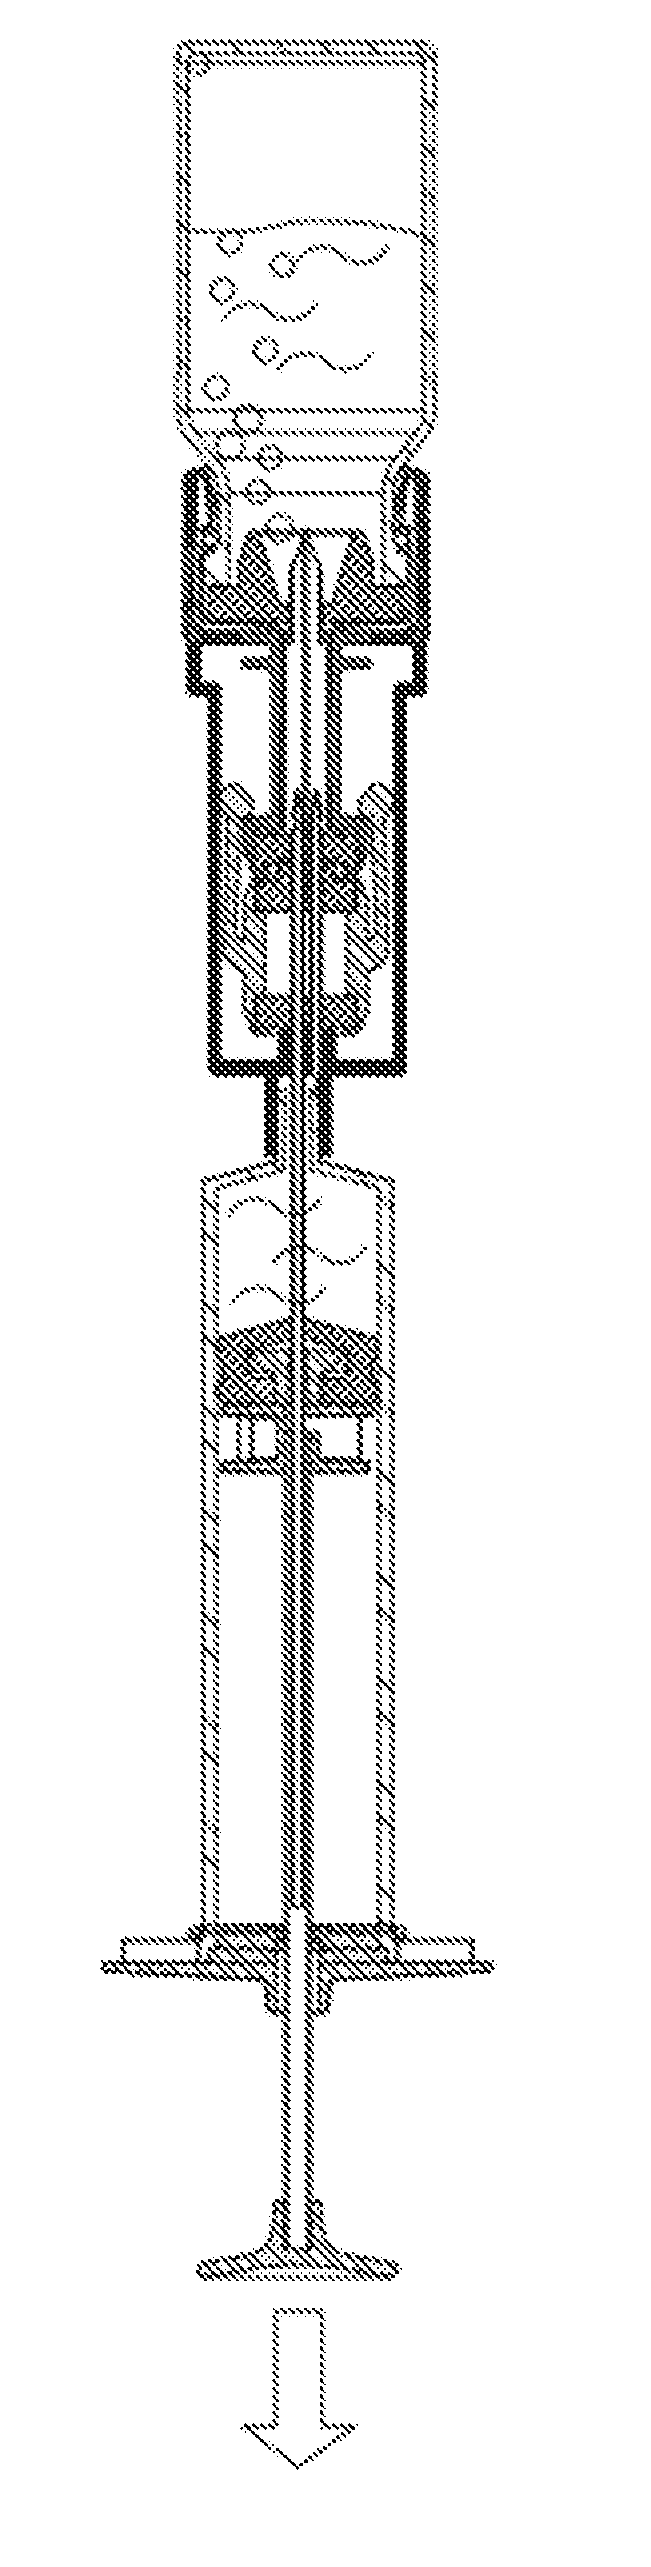 Needle valve and connectors for use in liquid transfer apparatuses